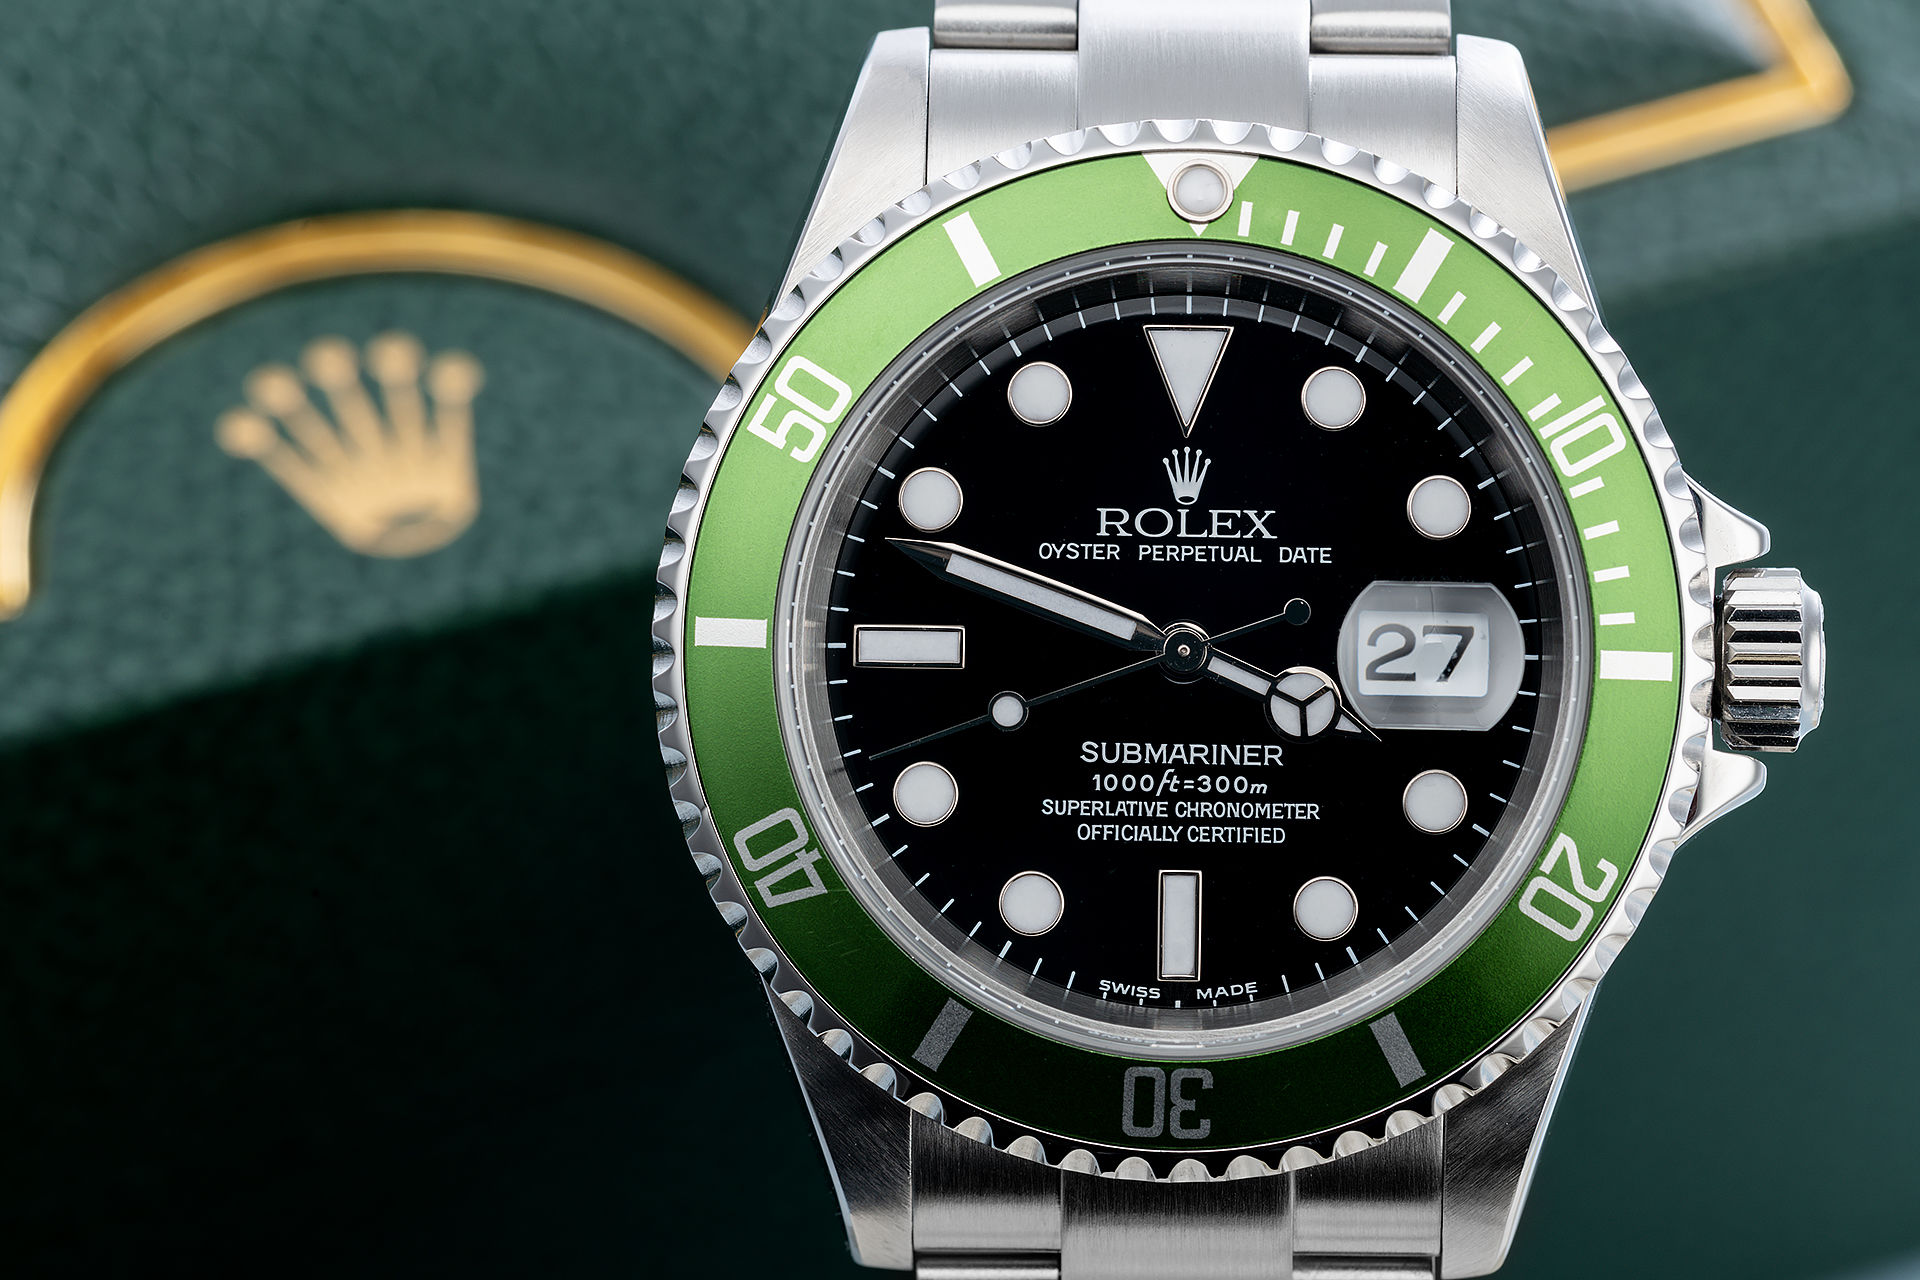 ref 16610LV | 'Early F Series' Olive bezel | Rolex Submariner Date